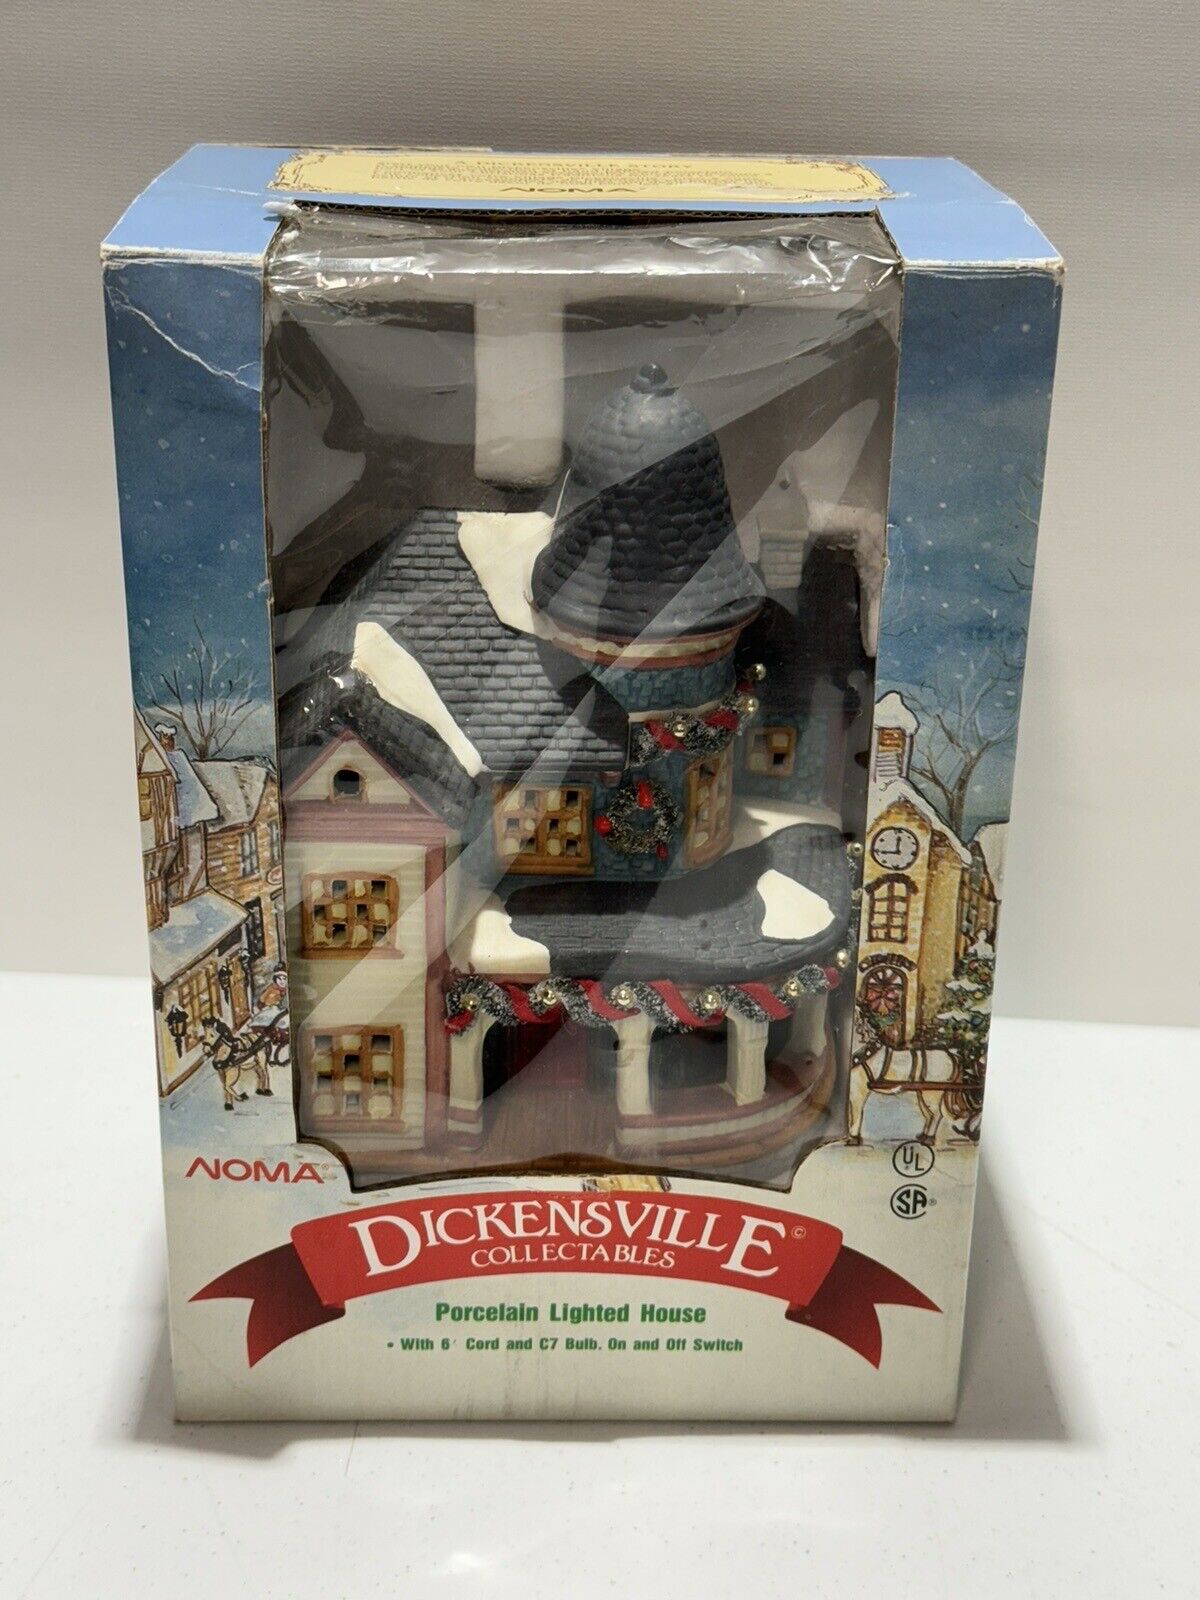 VINTAGE Dickensville Collectibles Lighted Victorian House 1996 Noma Works